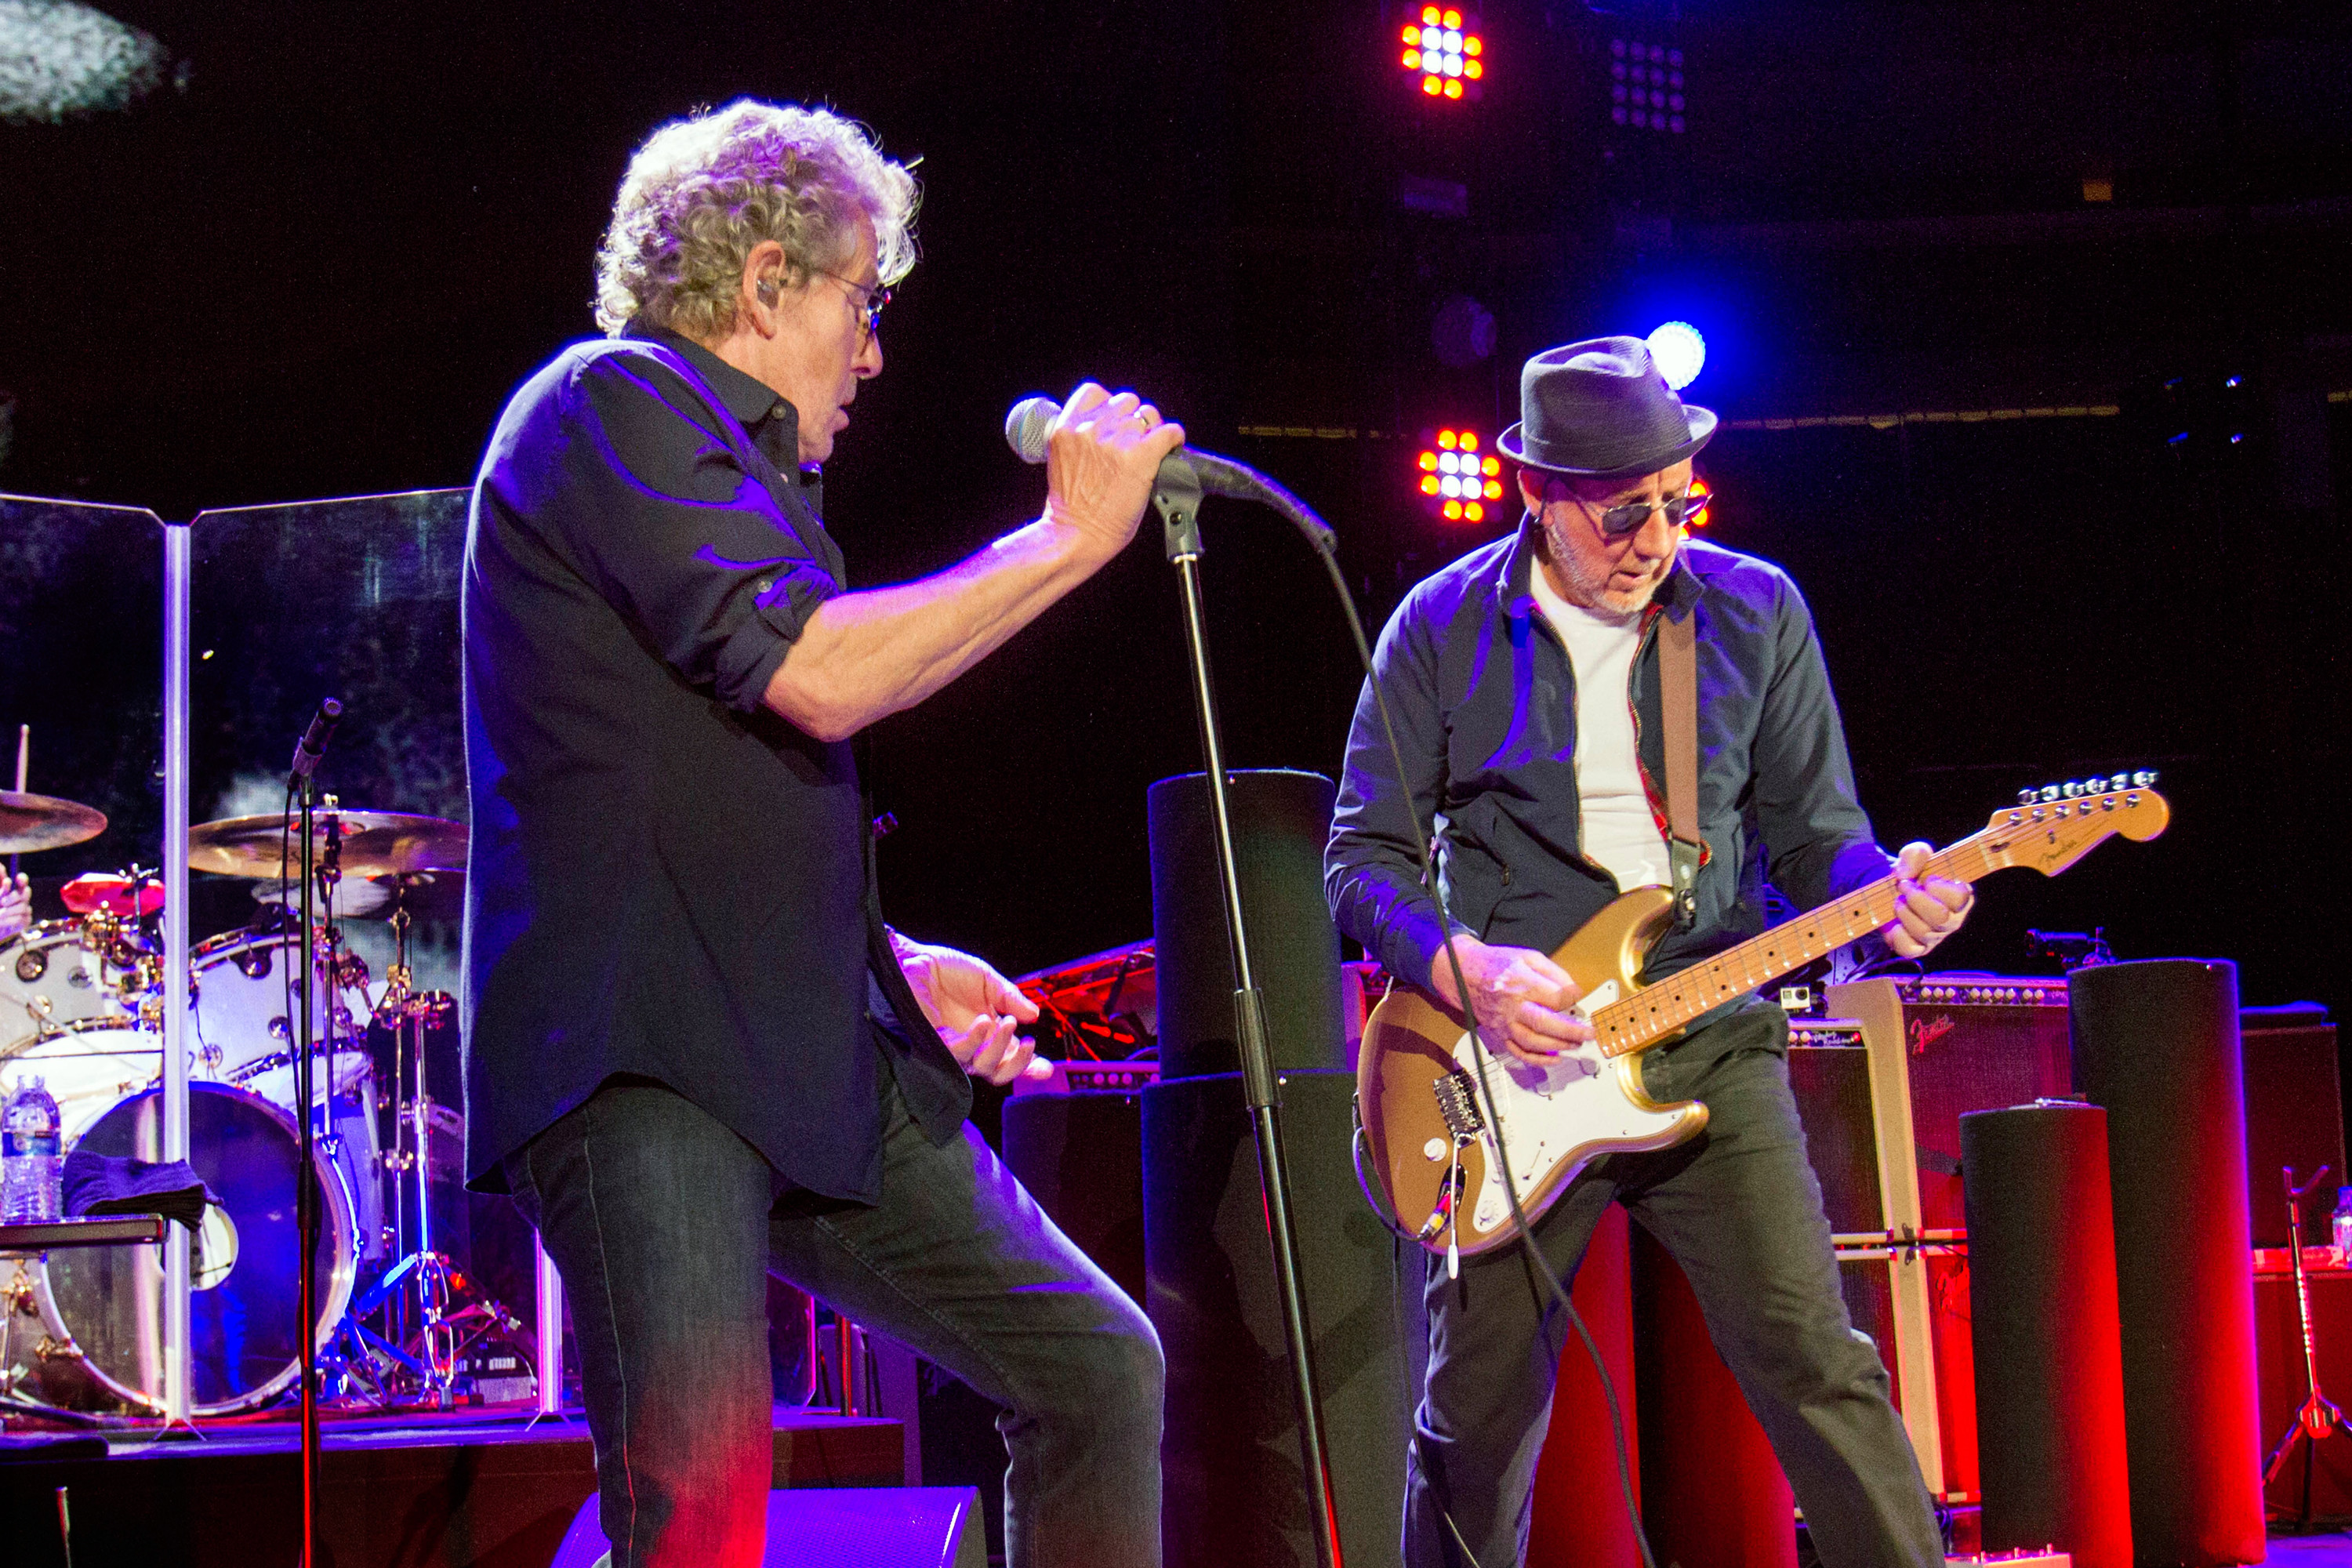 The Who Perform at The Prudential Center. in Newark, NY on March 19, 2016.